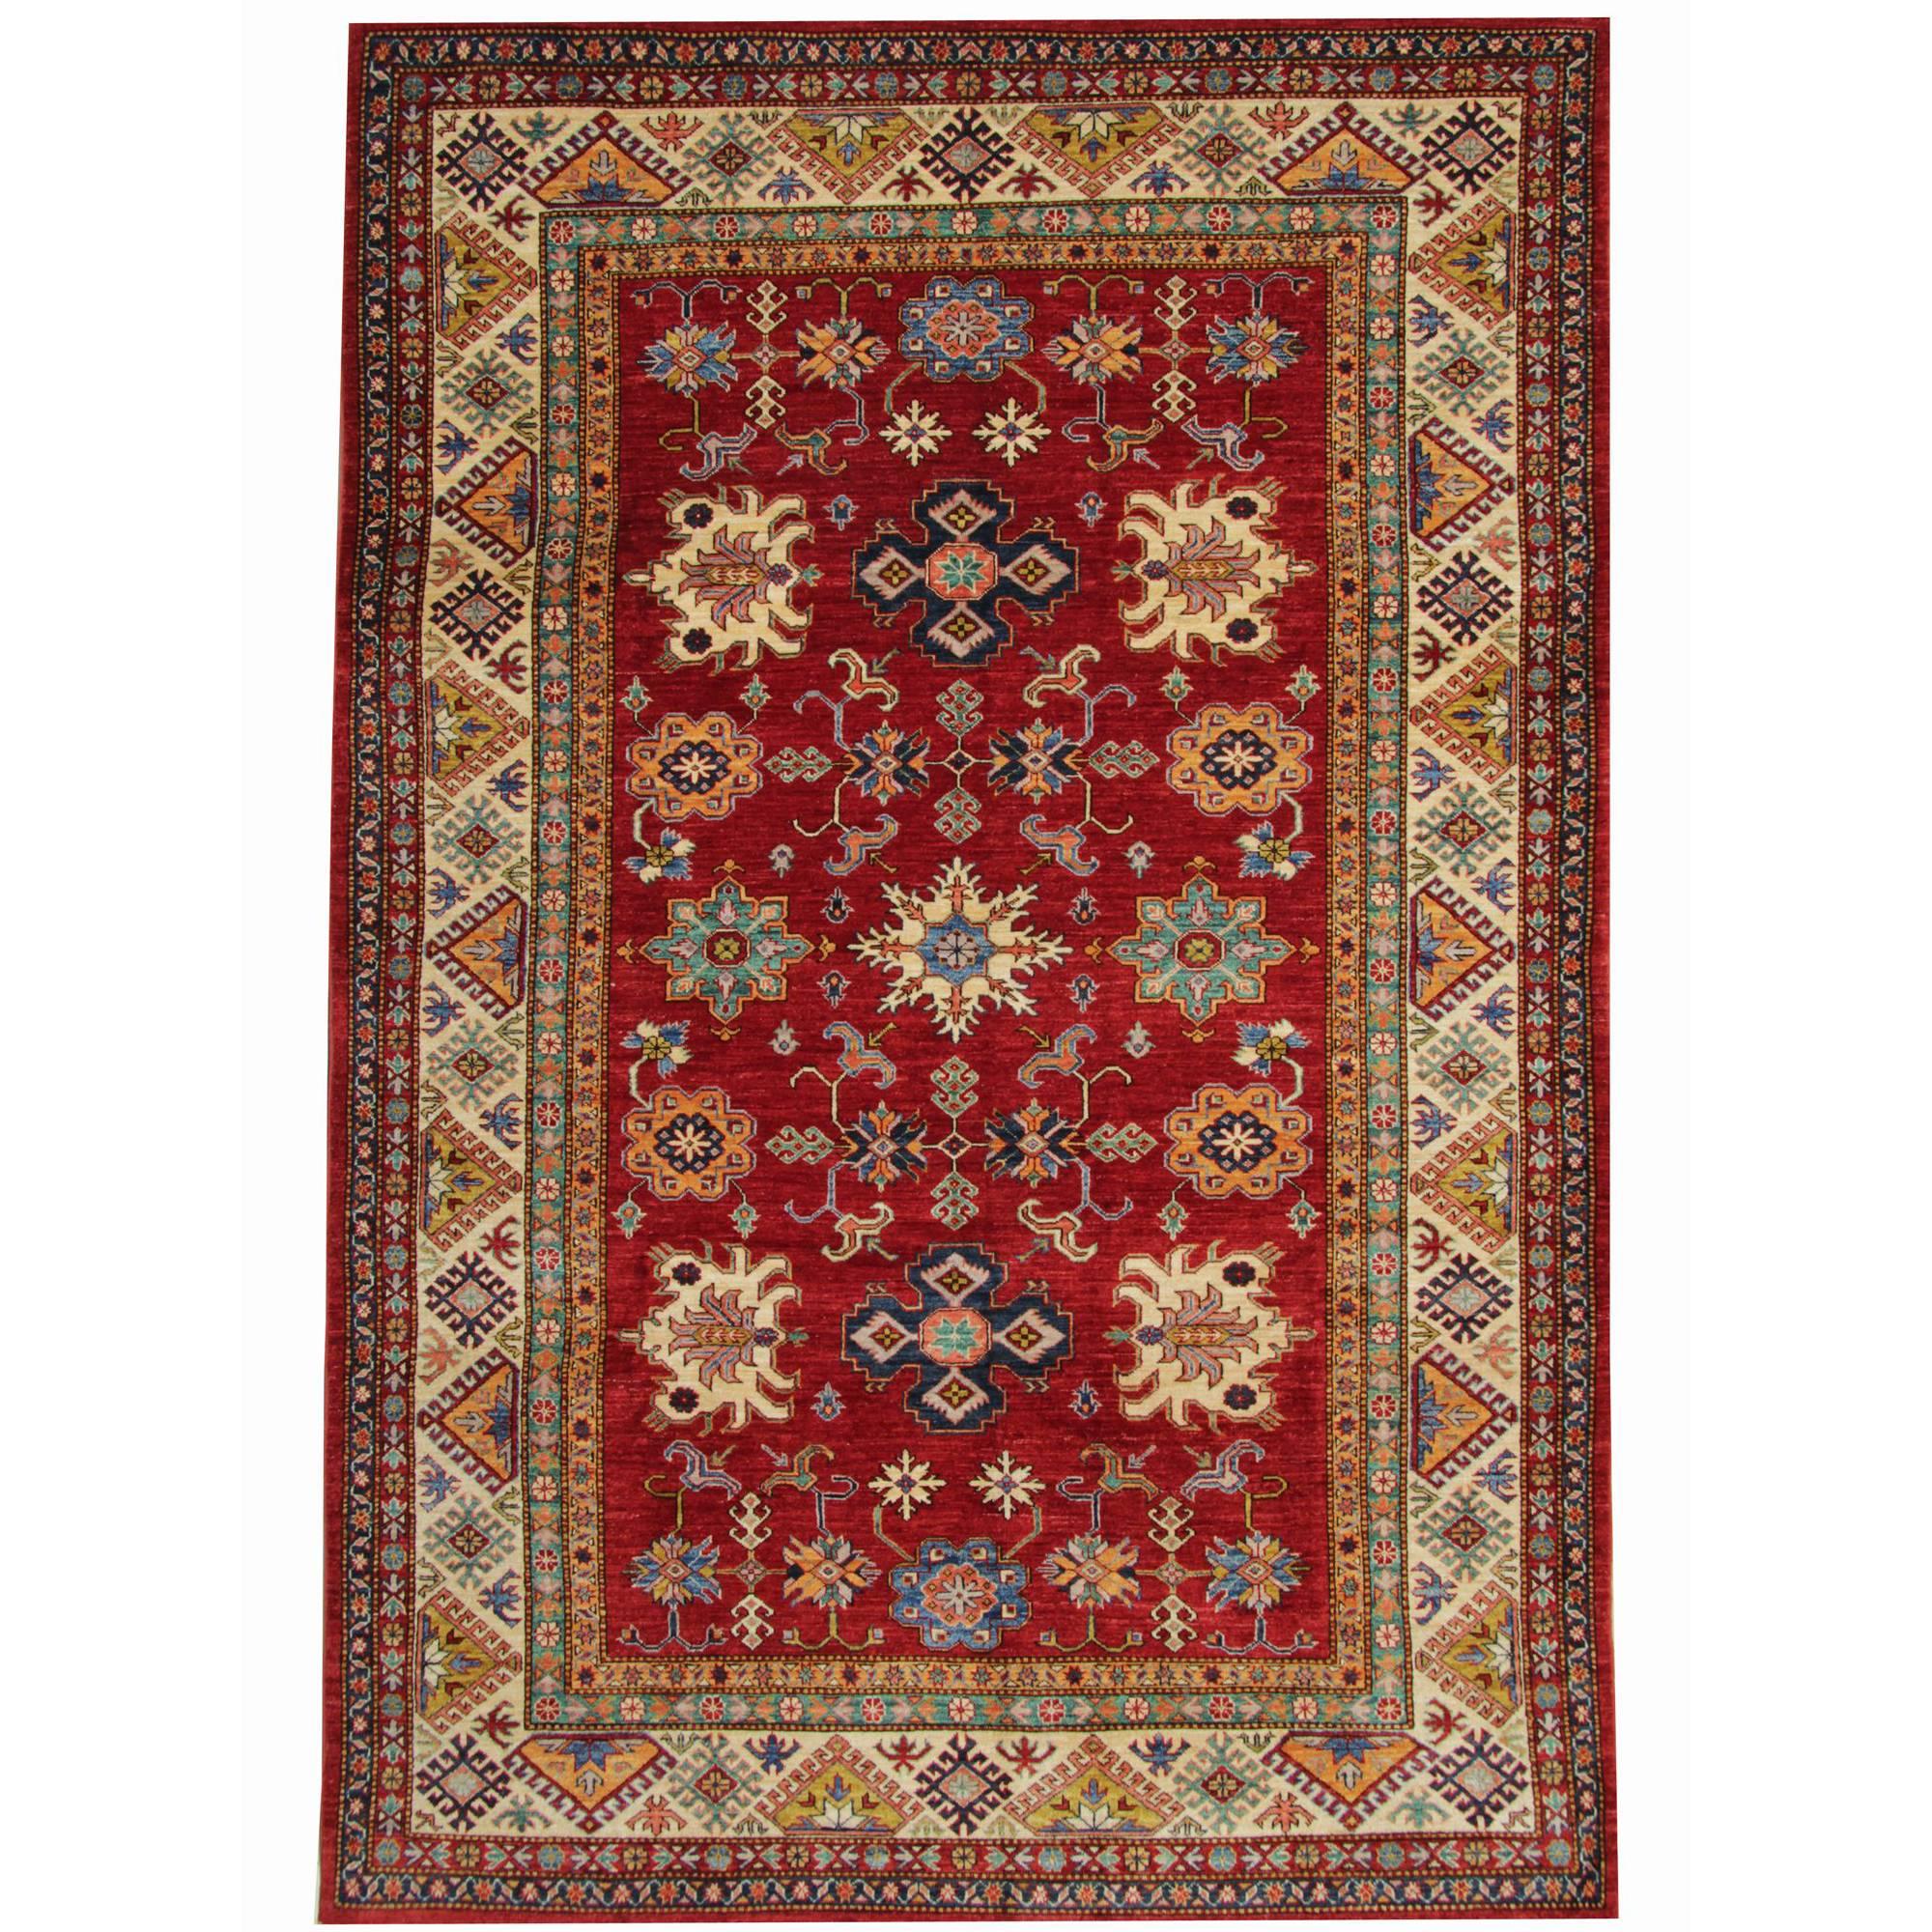 Oriental Rugs, Handmade Carpet Kazak Rugs, Traditional Rugs for Sale For Sale